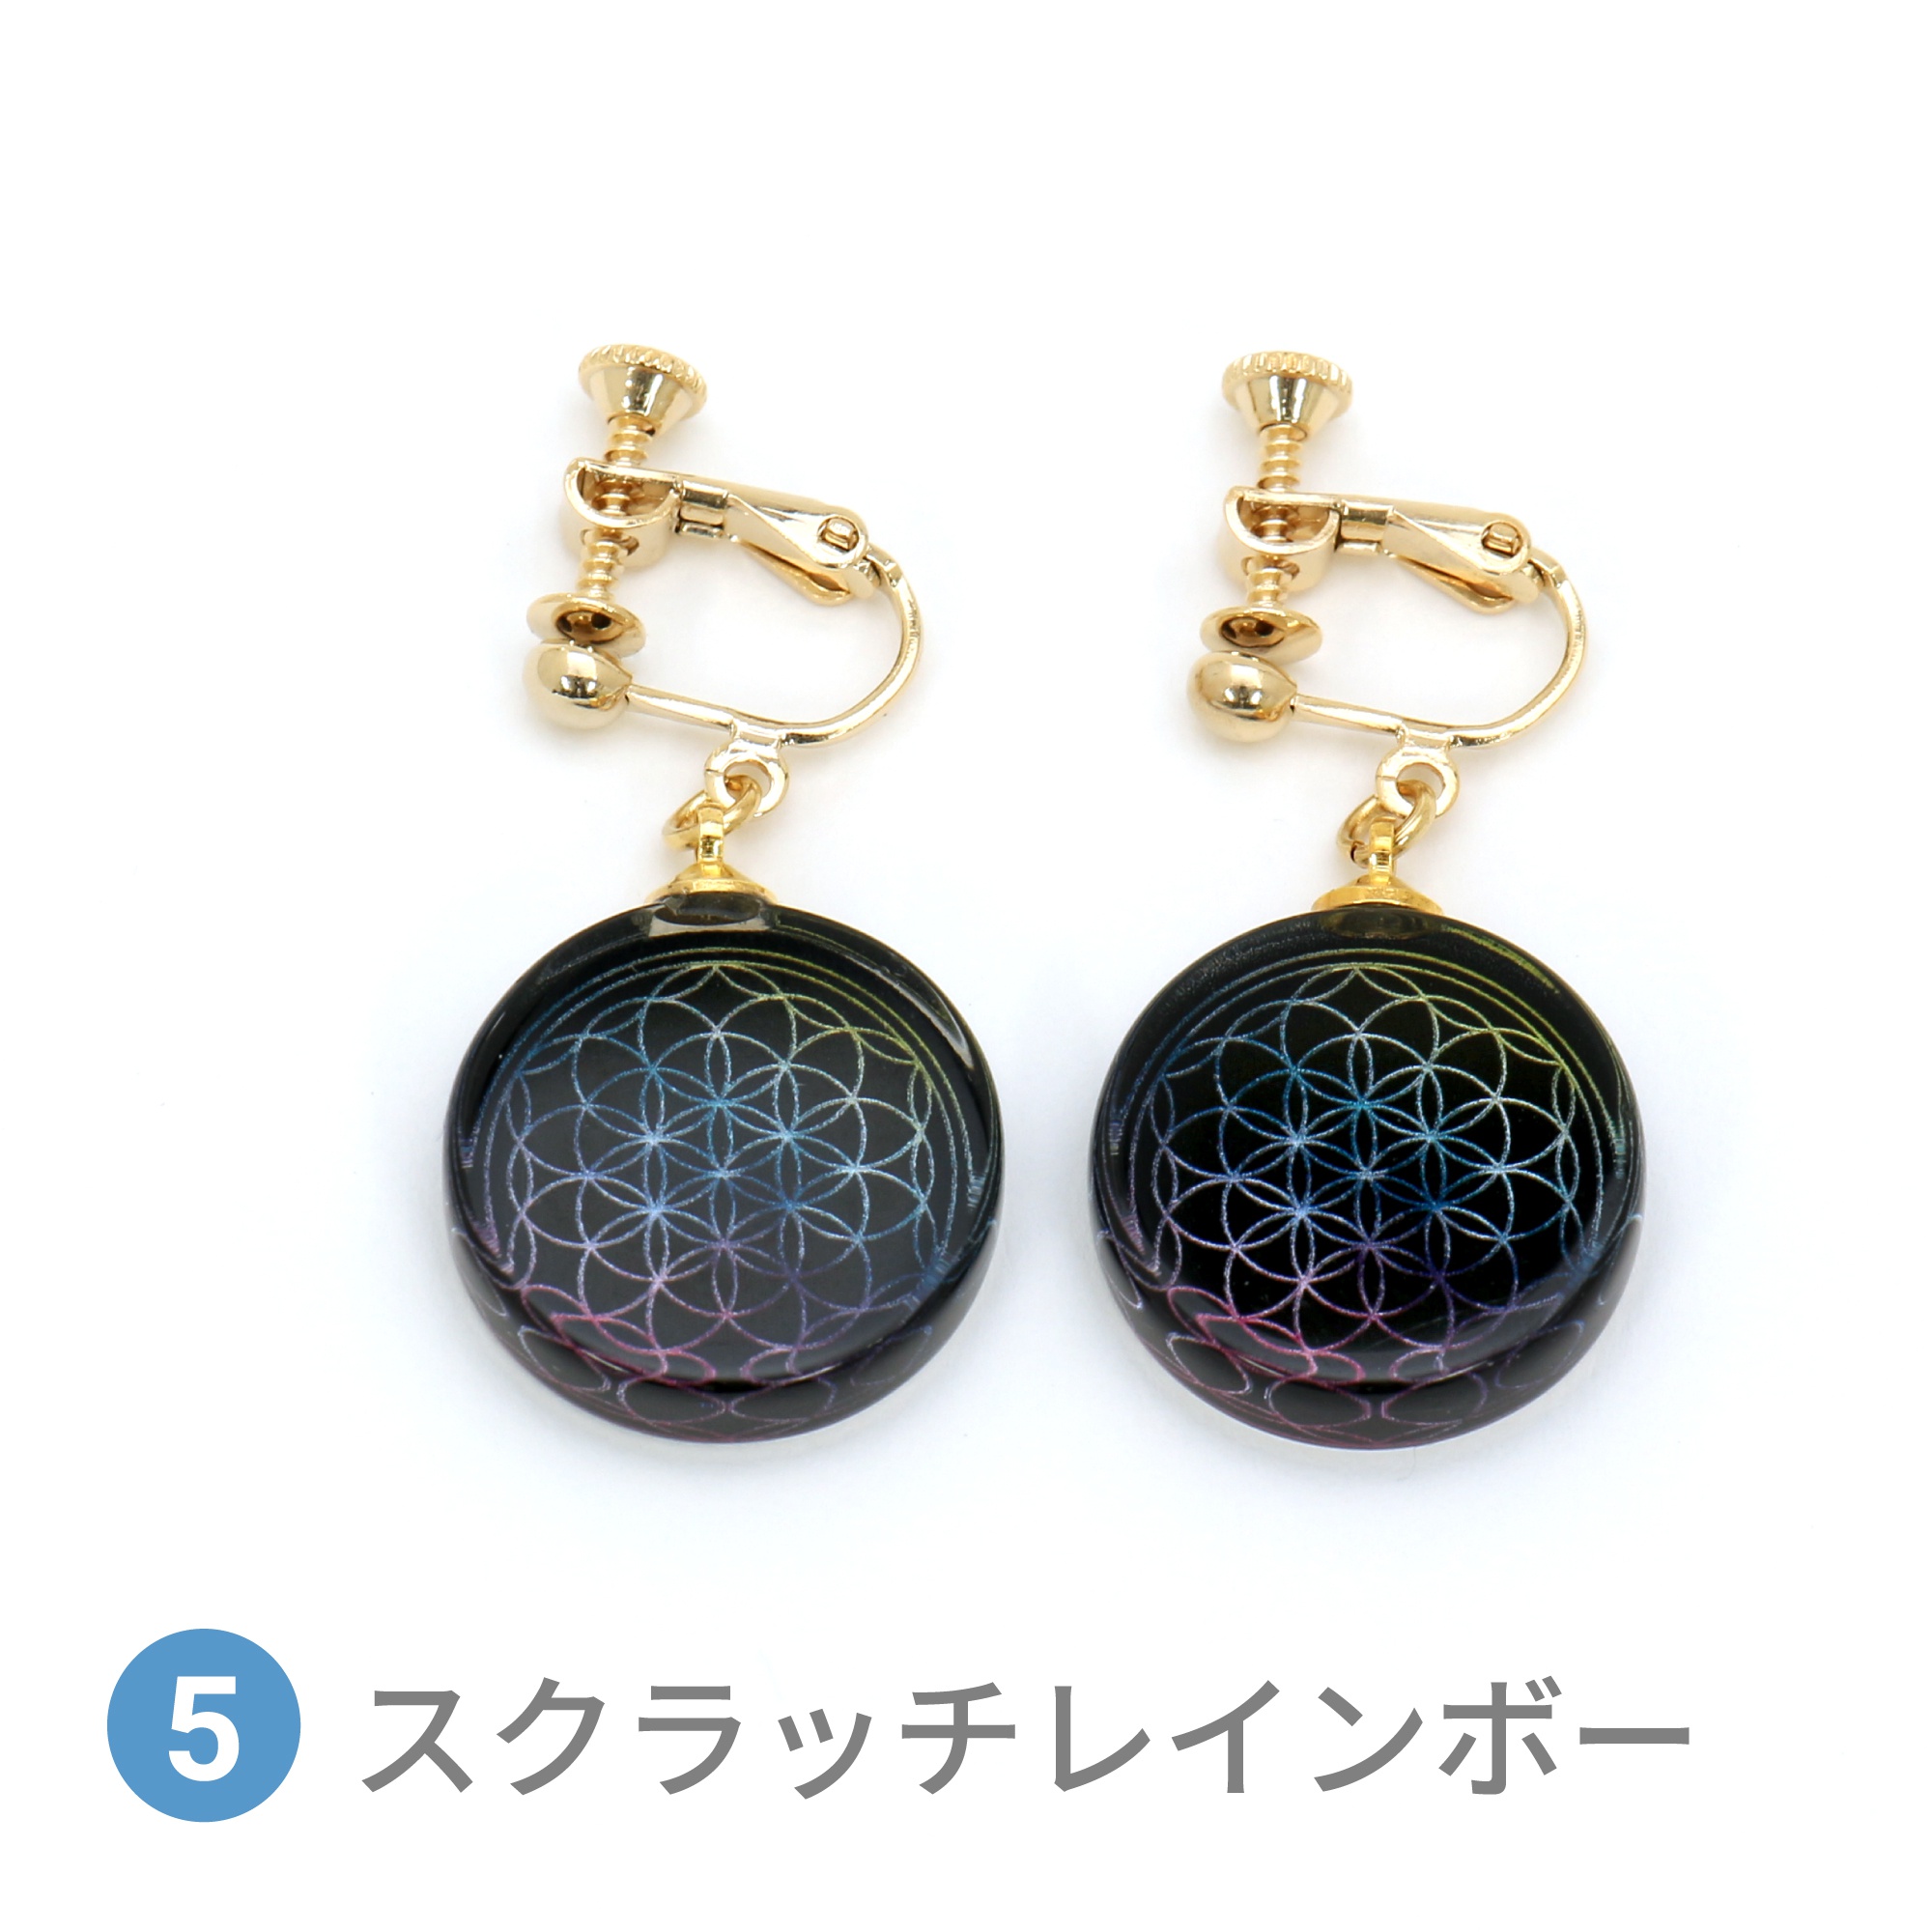 Glass accessories Earring FLOWER OF LIFE scratch rainbow round shape